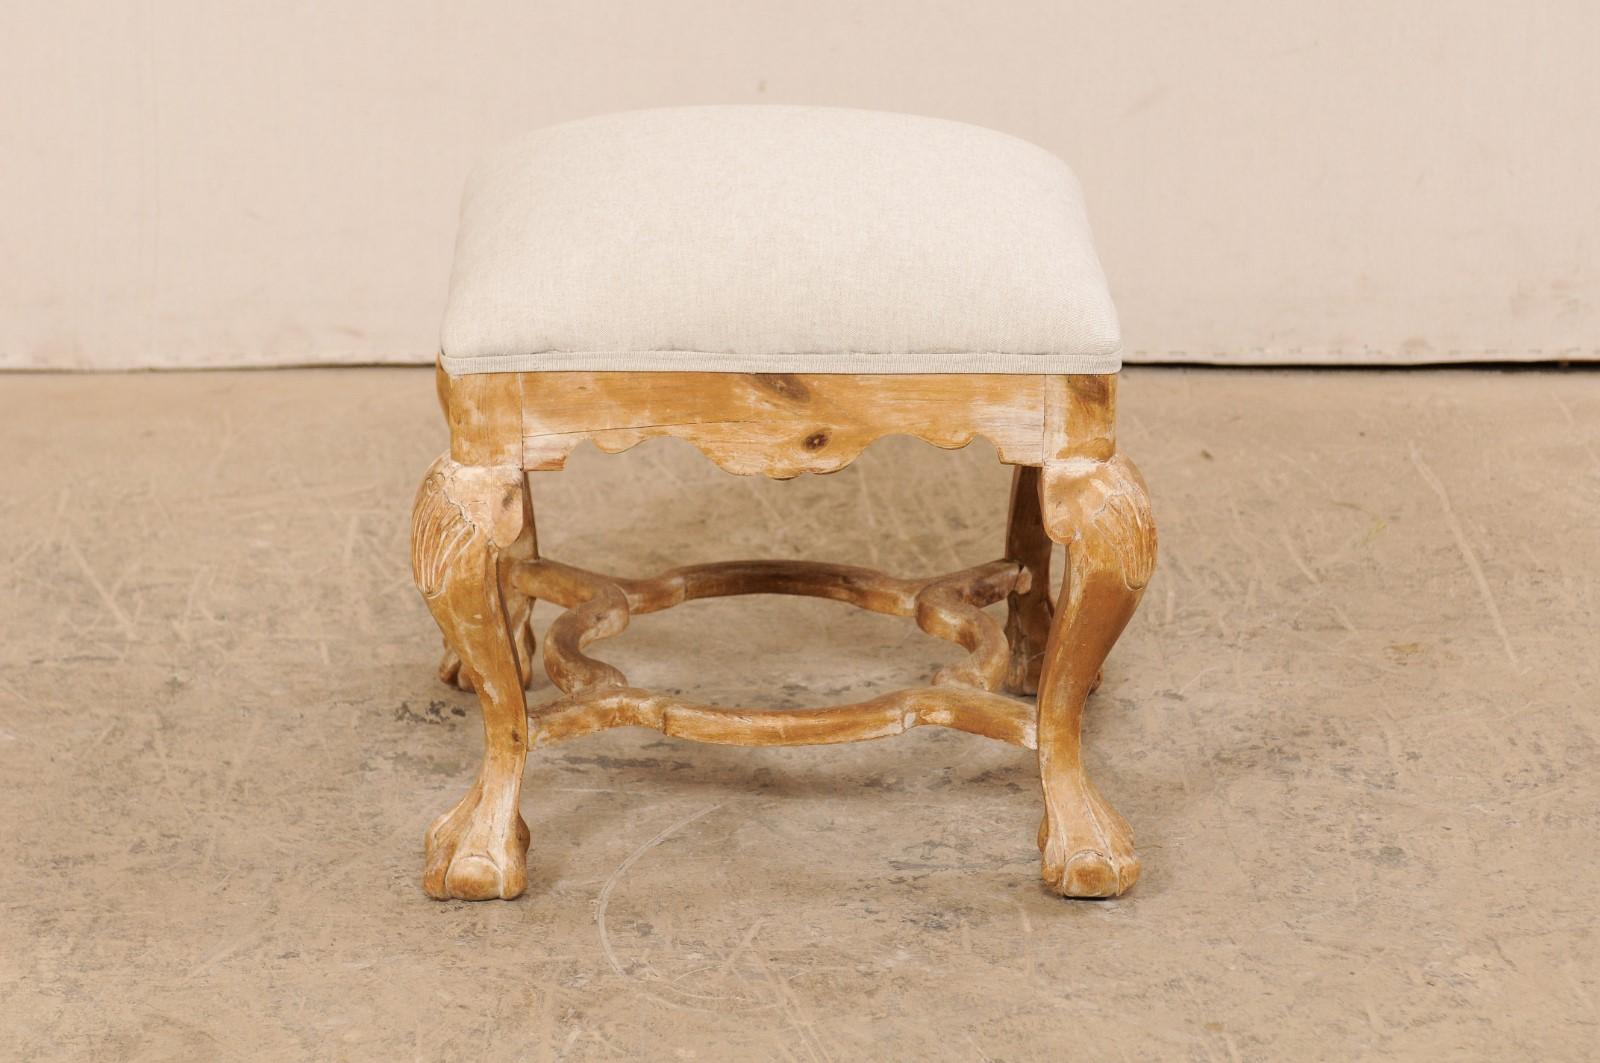 20th Century Italian-Style Ottoman with Paw and Ball Feet